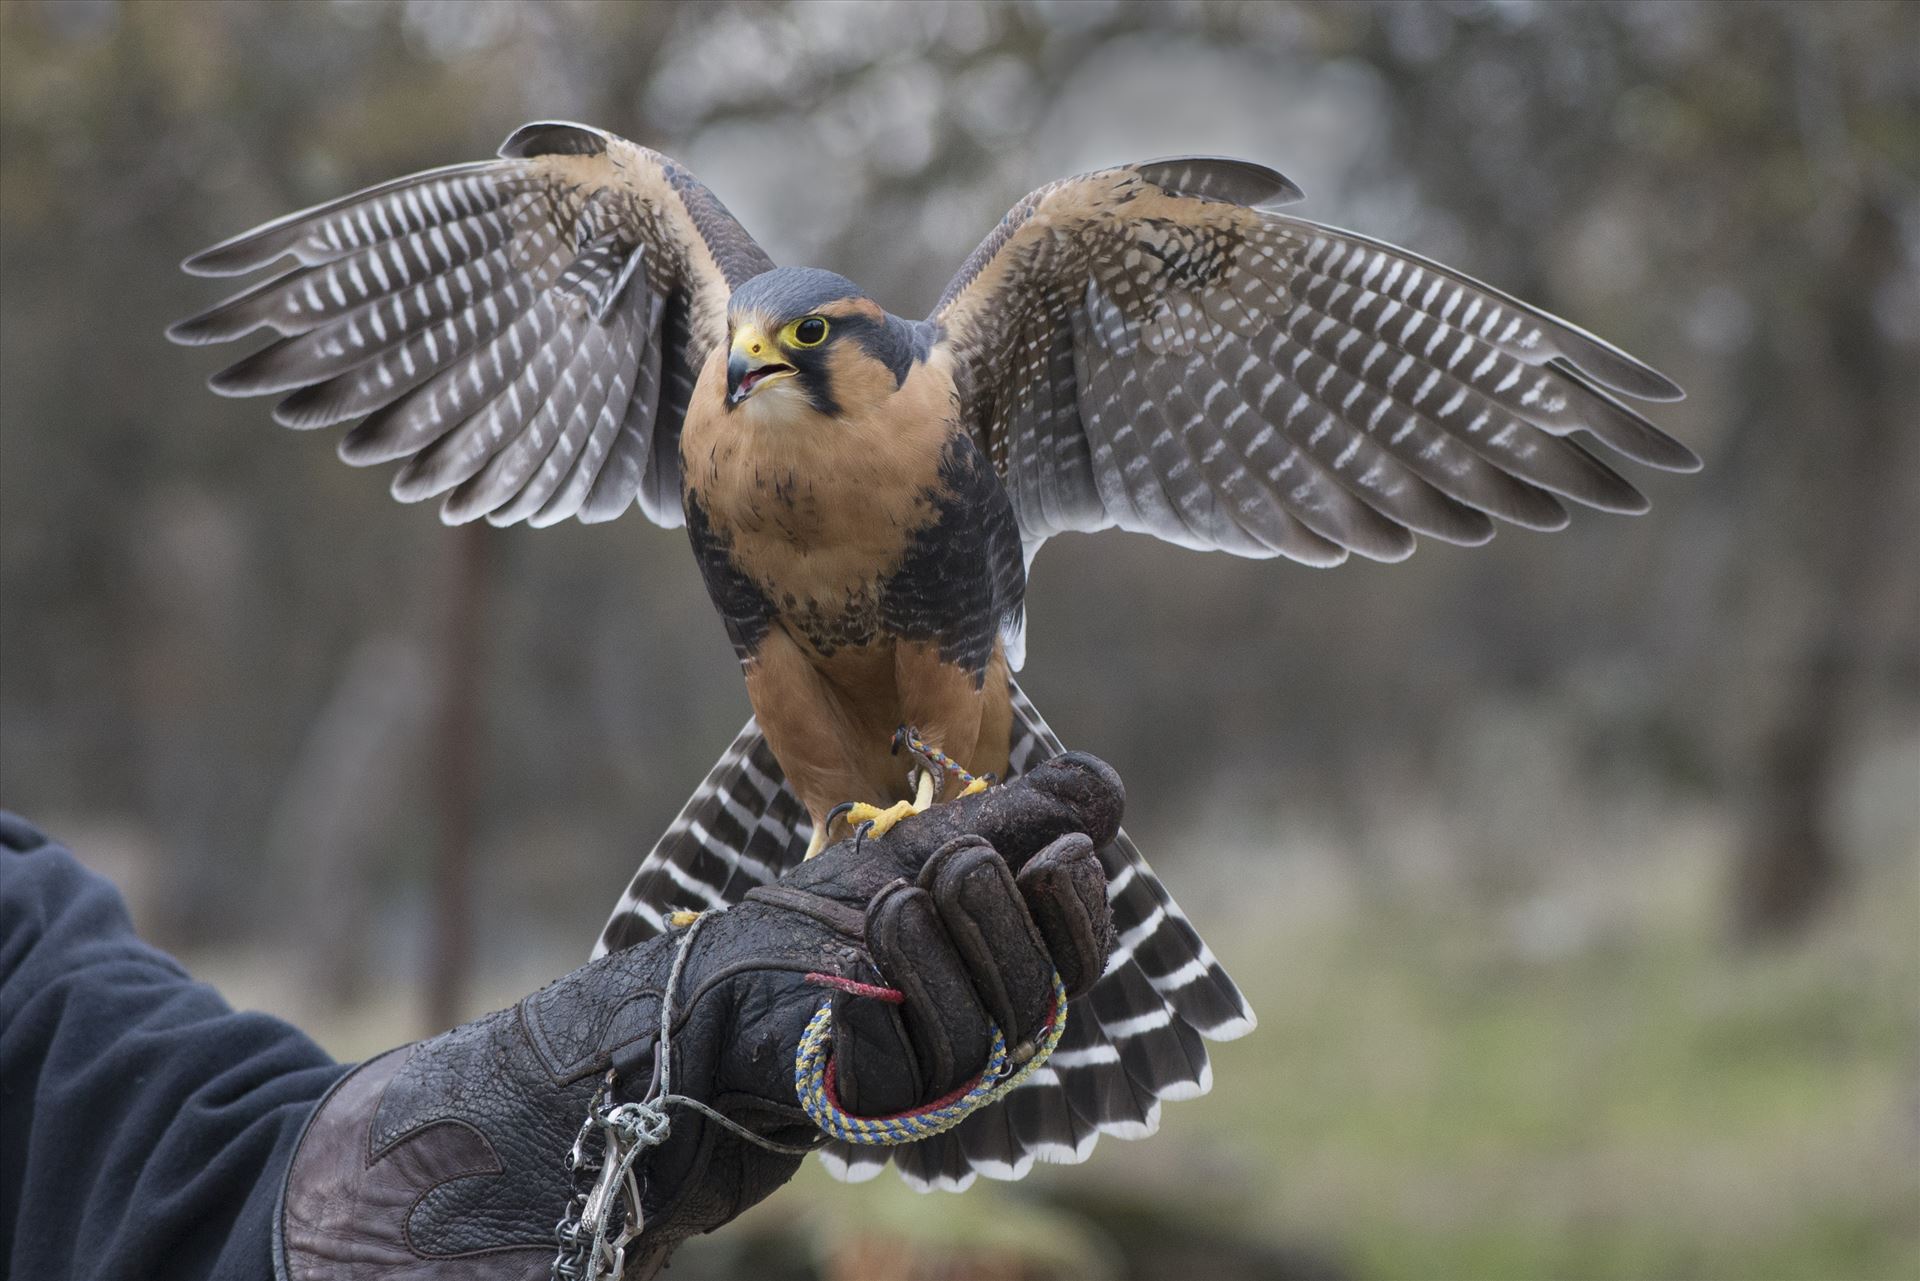 Ready for Takeoff Apomado Falcon with trainer by Denise Buckley Crawford